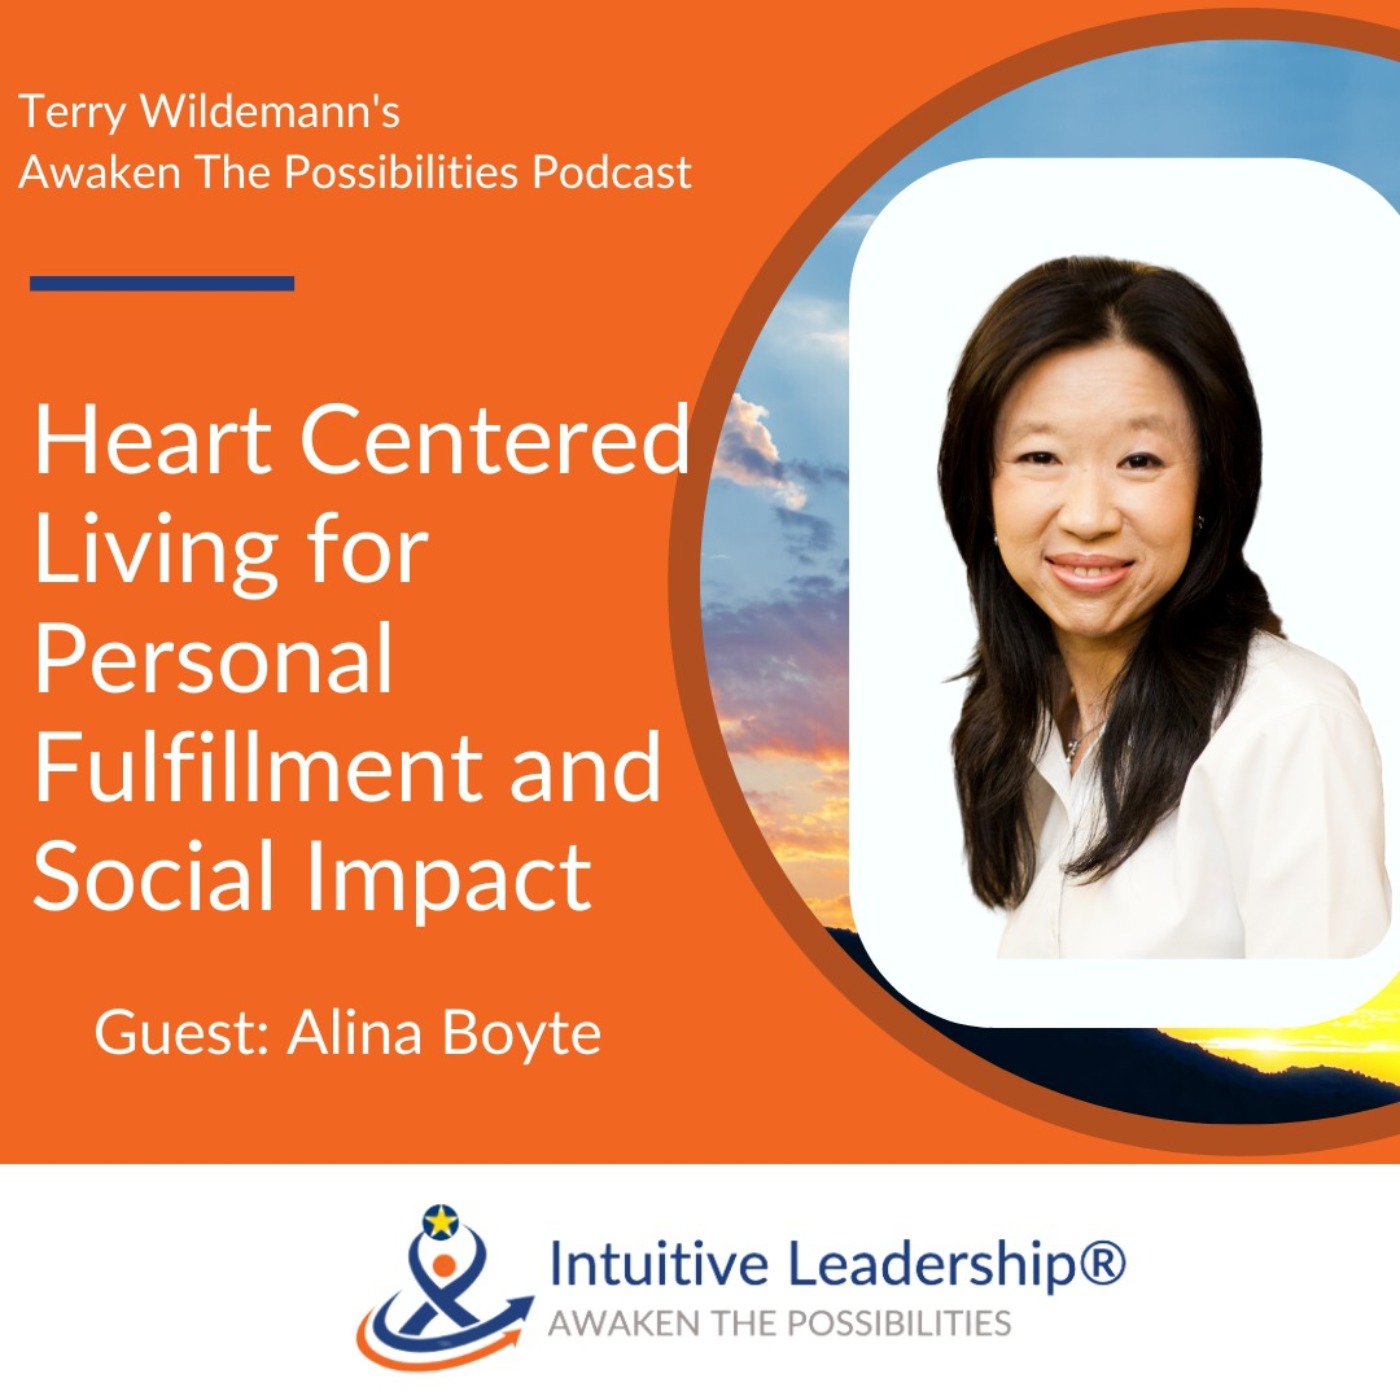 Awaken The Possibilities: Heart Centered Living for Personal Fulfillment and Social Impact